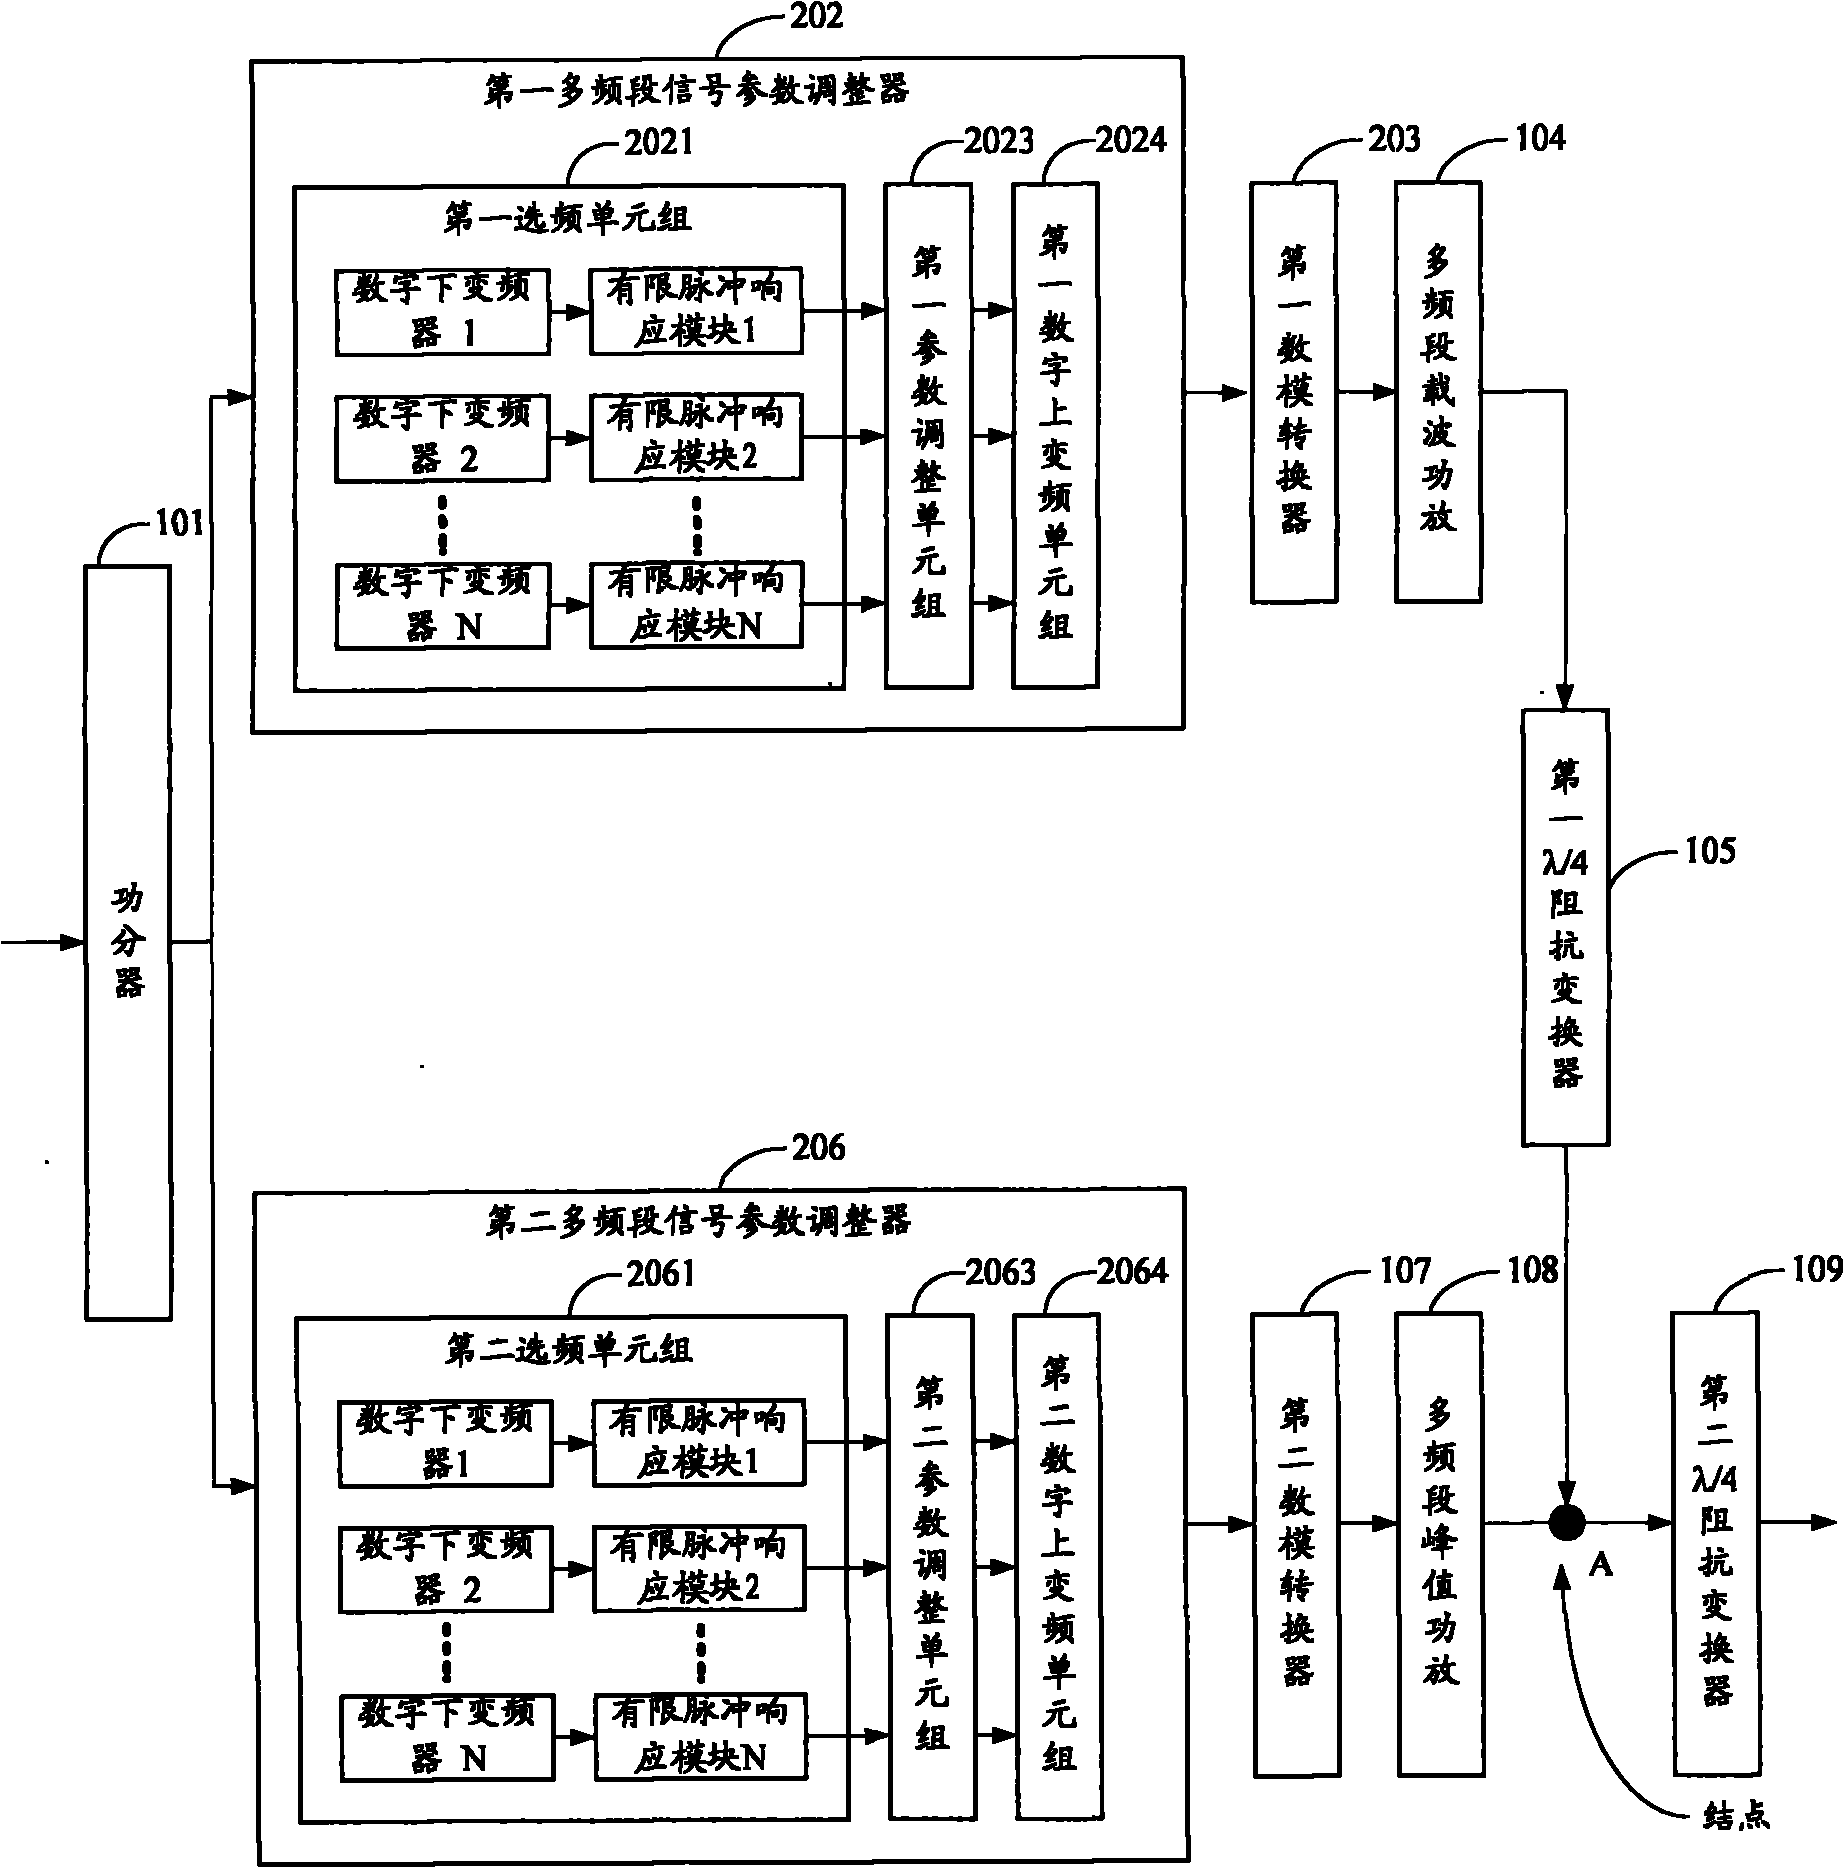 Doherty power amplifier and multi-frequency band signal parameter adjusting device